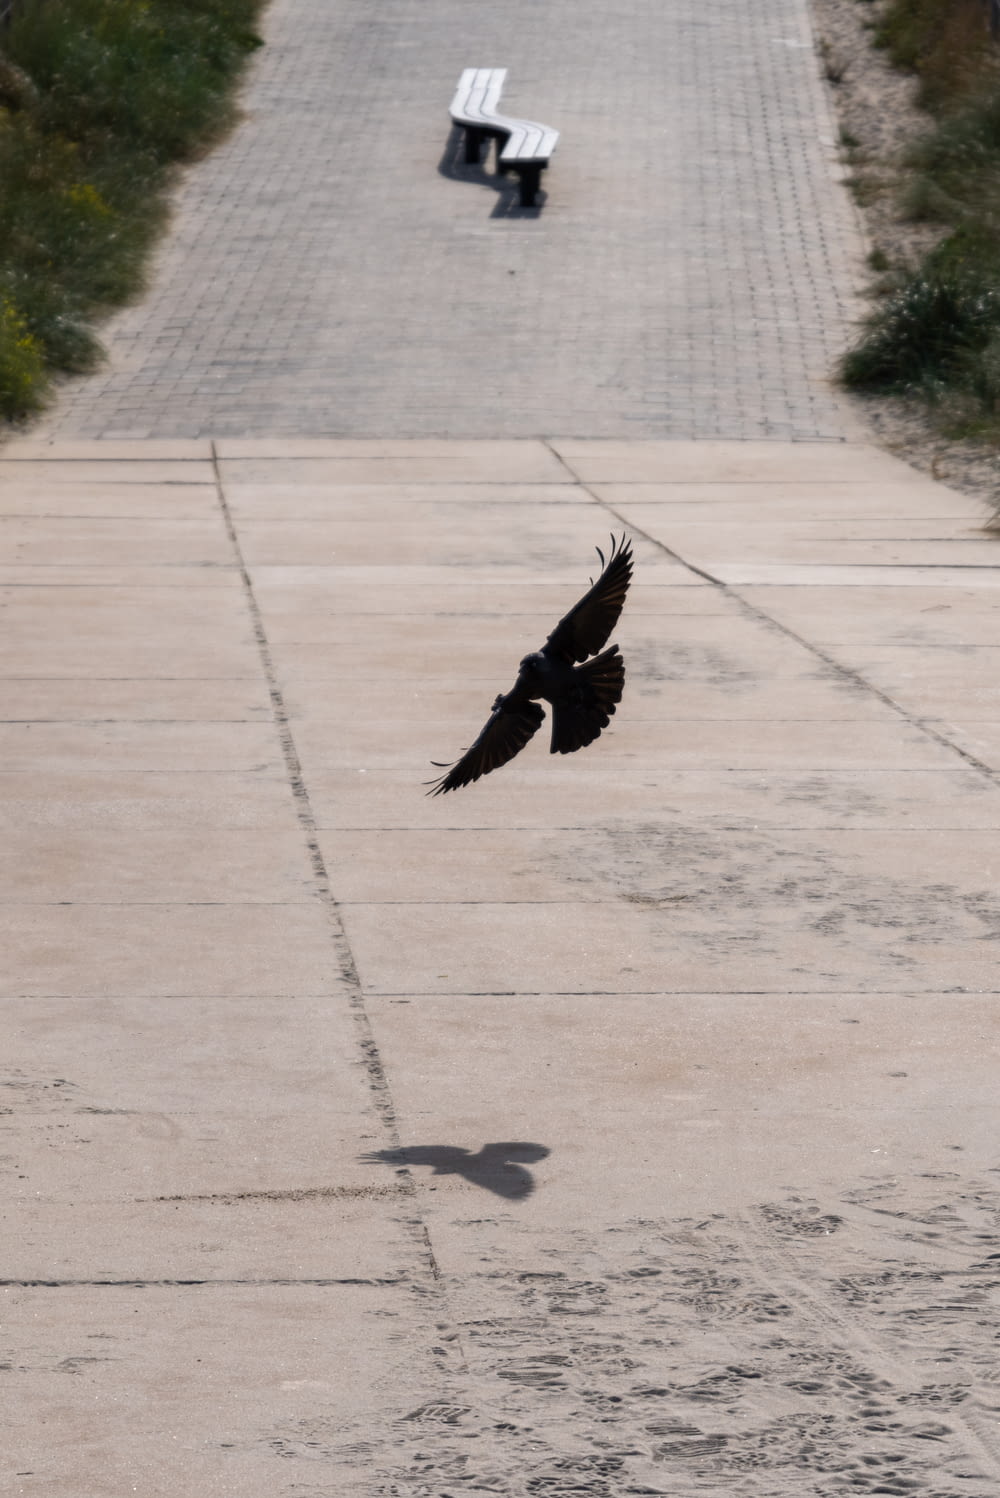 a bird flying over a sidewalk with benches in the background